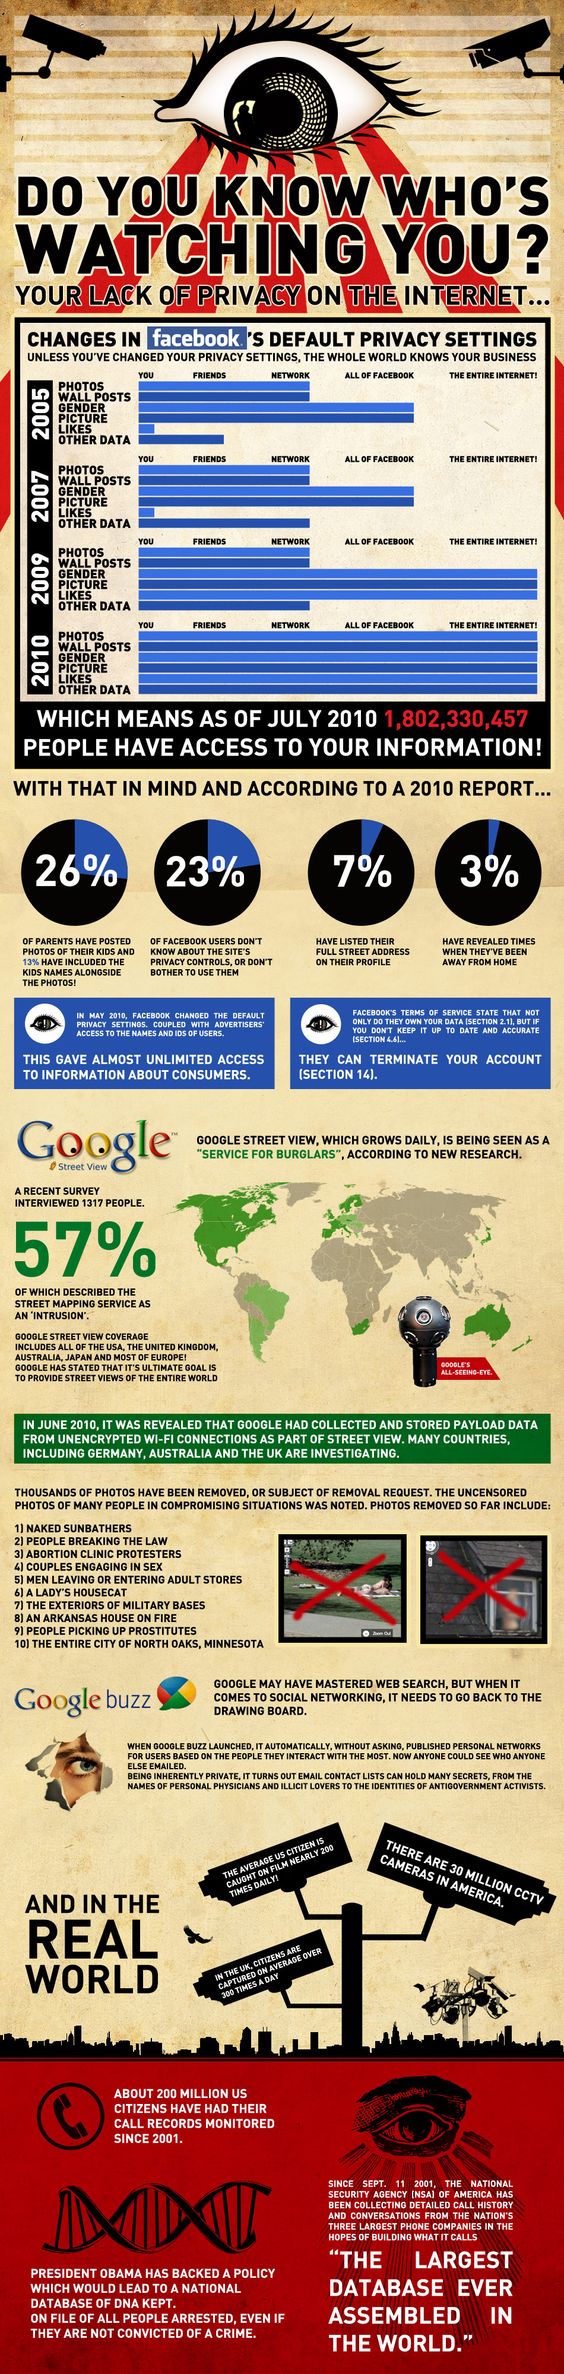 Do You Know Who Is Watching You – Internet Privacy [Infographic]